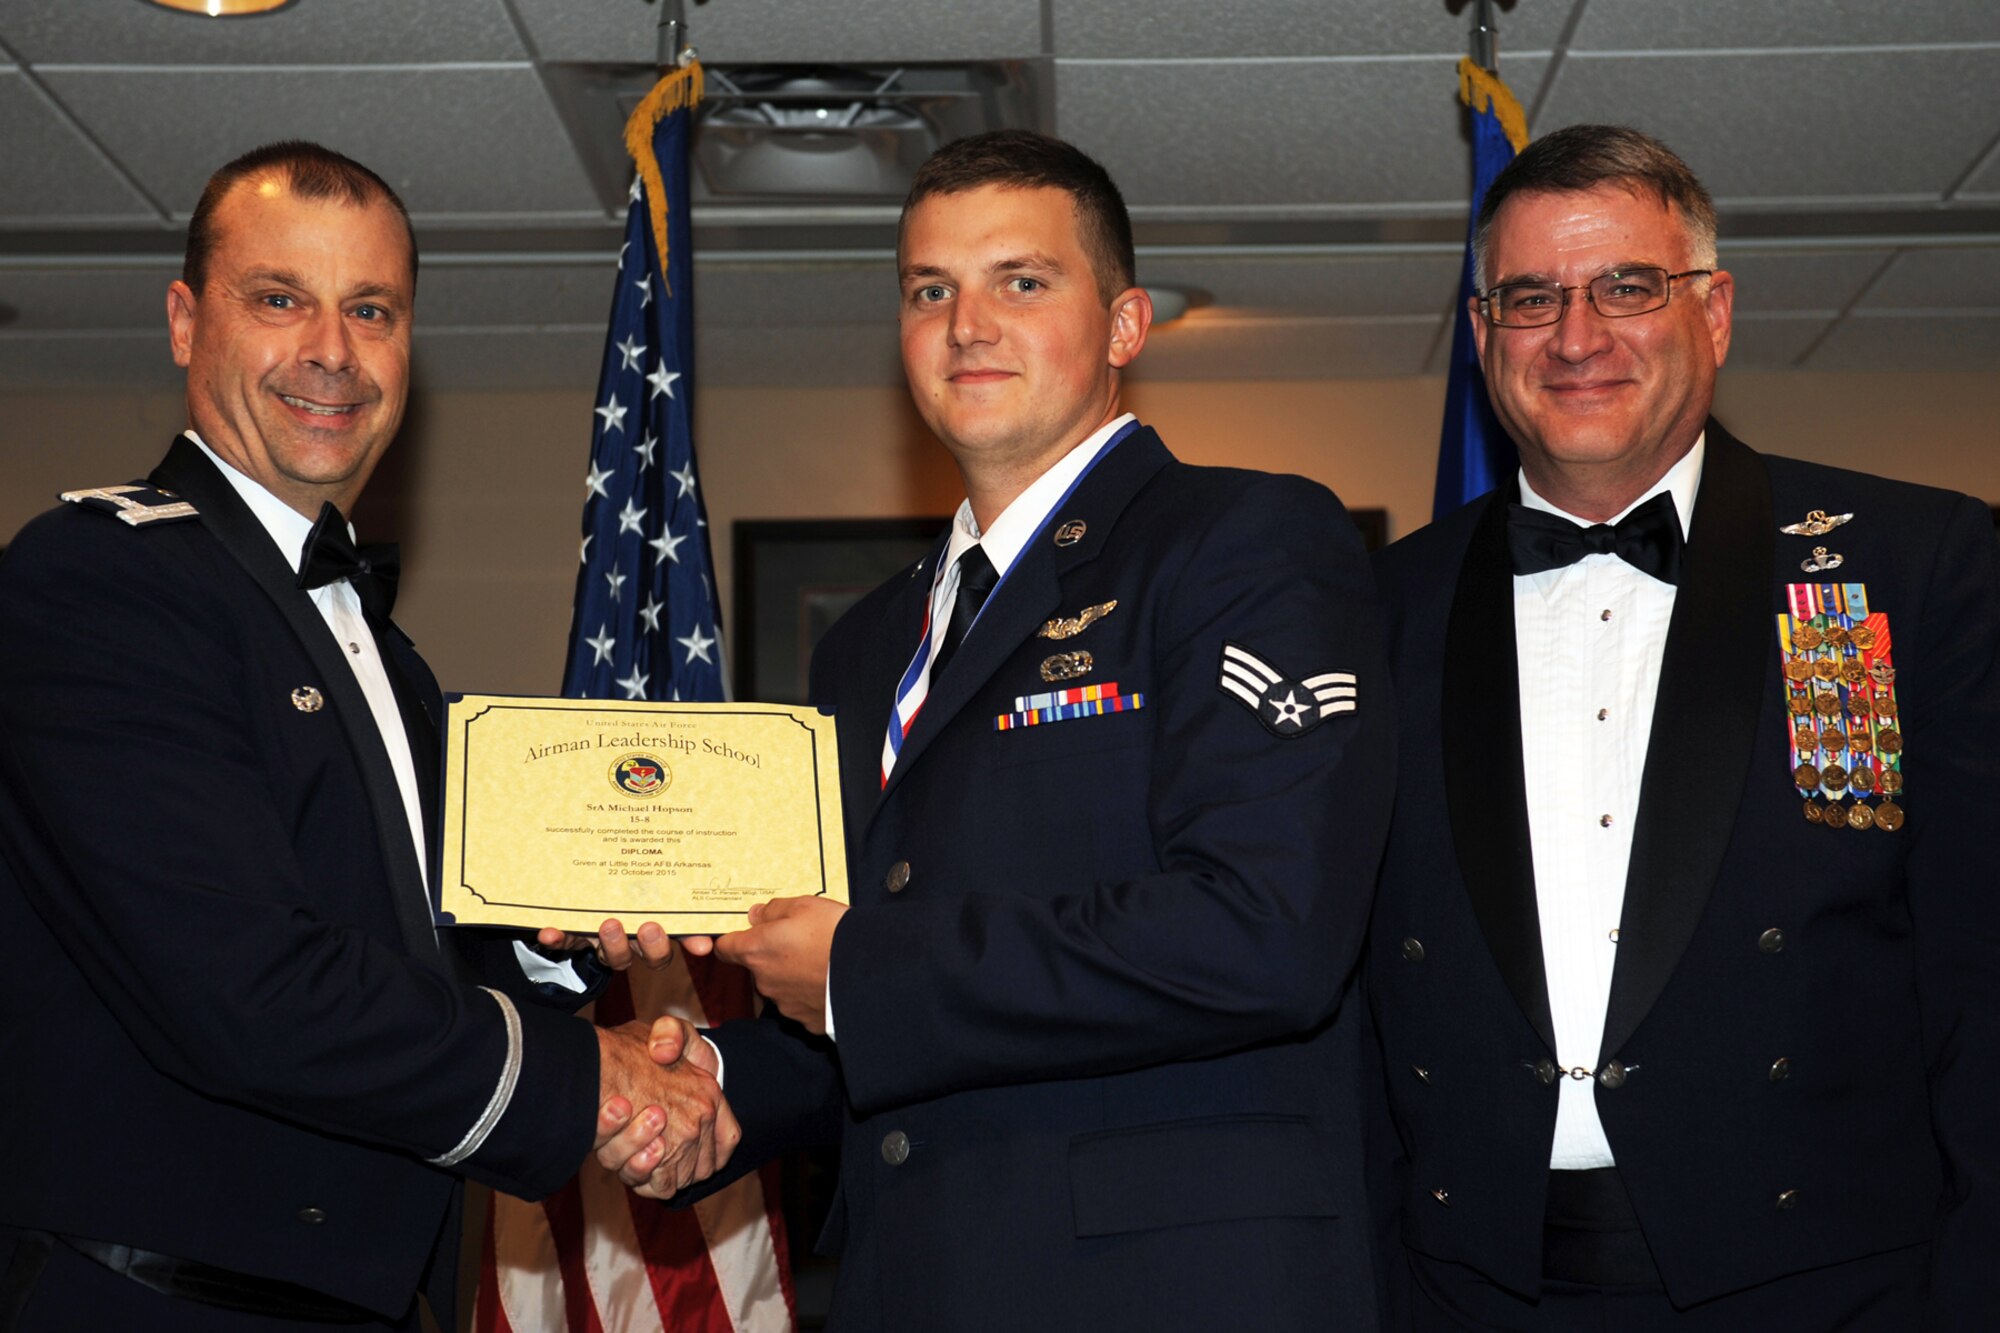 U.S. Air Force Col. Craig Drescher, 913th Airlift Group commander, poses for a photo with Senior Airman Michael Hopson, flight engineer, 327th Airlift Squadron, during the Airman Leadership School graduation ceremony at Little Rock Air Force base, Ark., Oct. 22, 2015. Hopson and his fellow graduates will soon become the Air Force’s newest noncommissioned officers. (U.S. Air Force photo by Senior Airman Harry Brexel/Released)